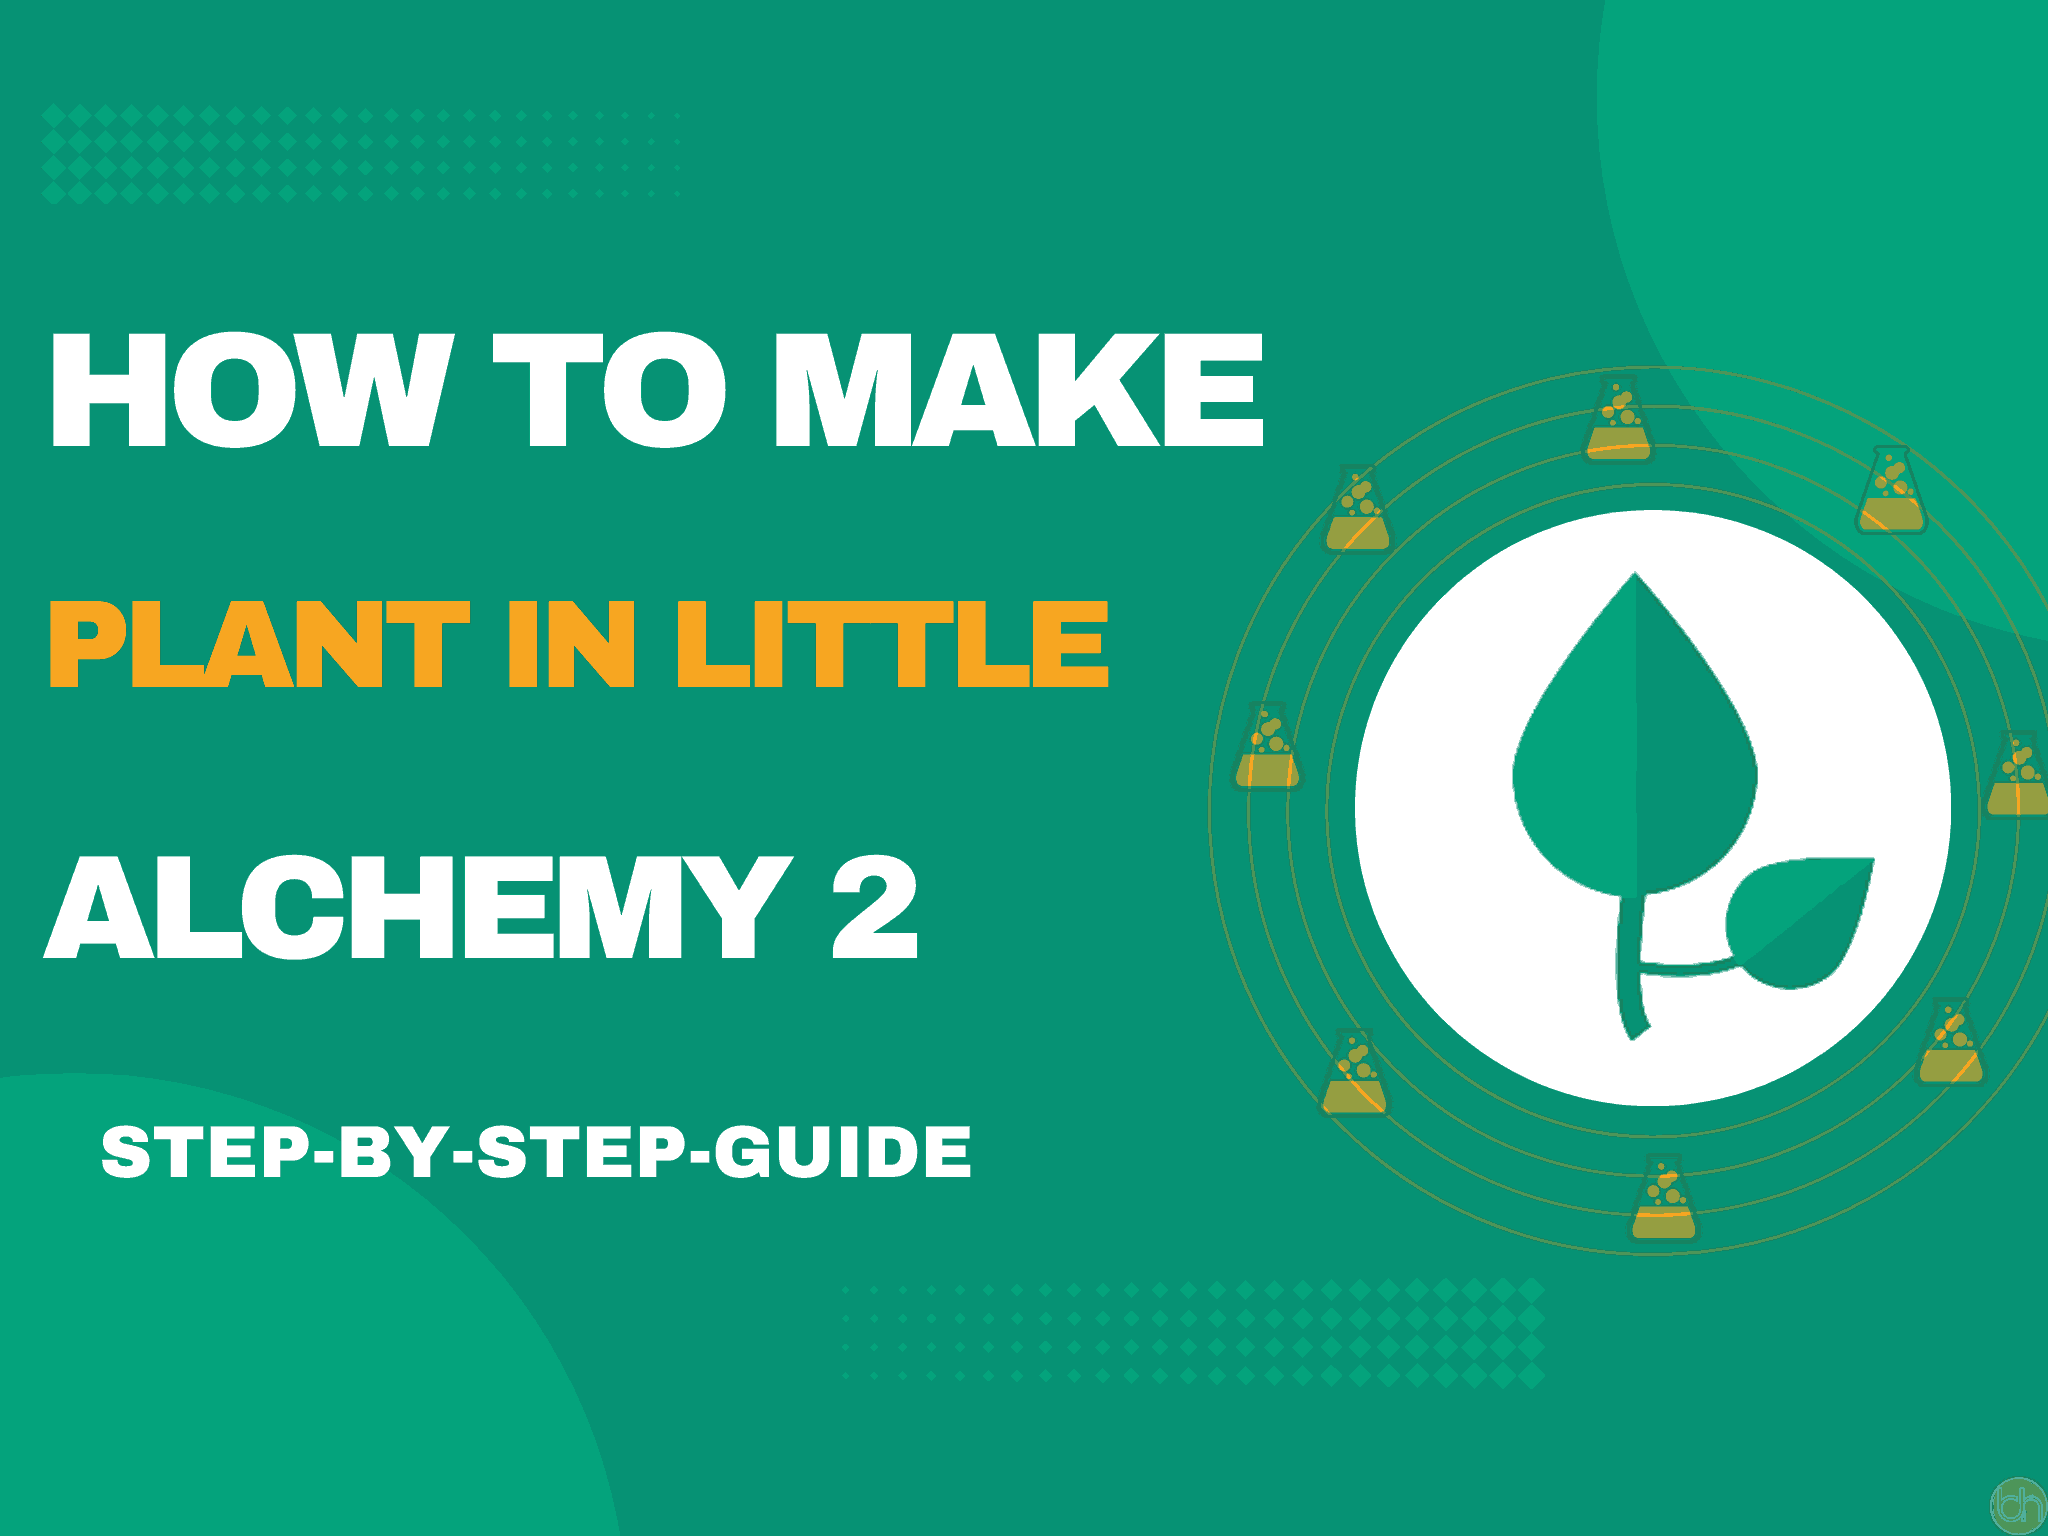 How to Make Plant in Little Alchemy 2?